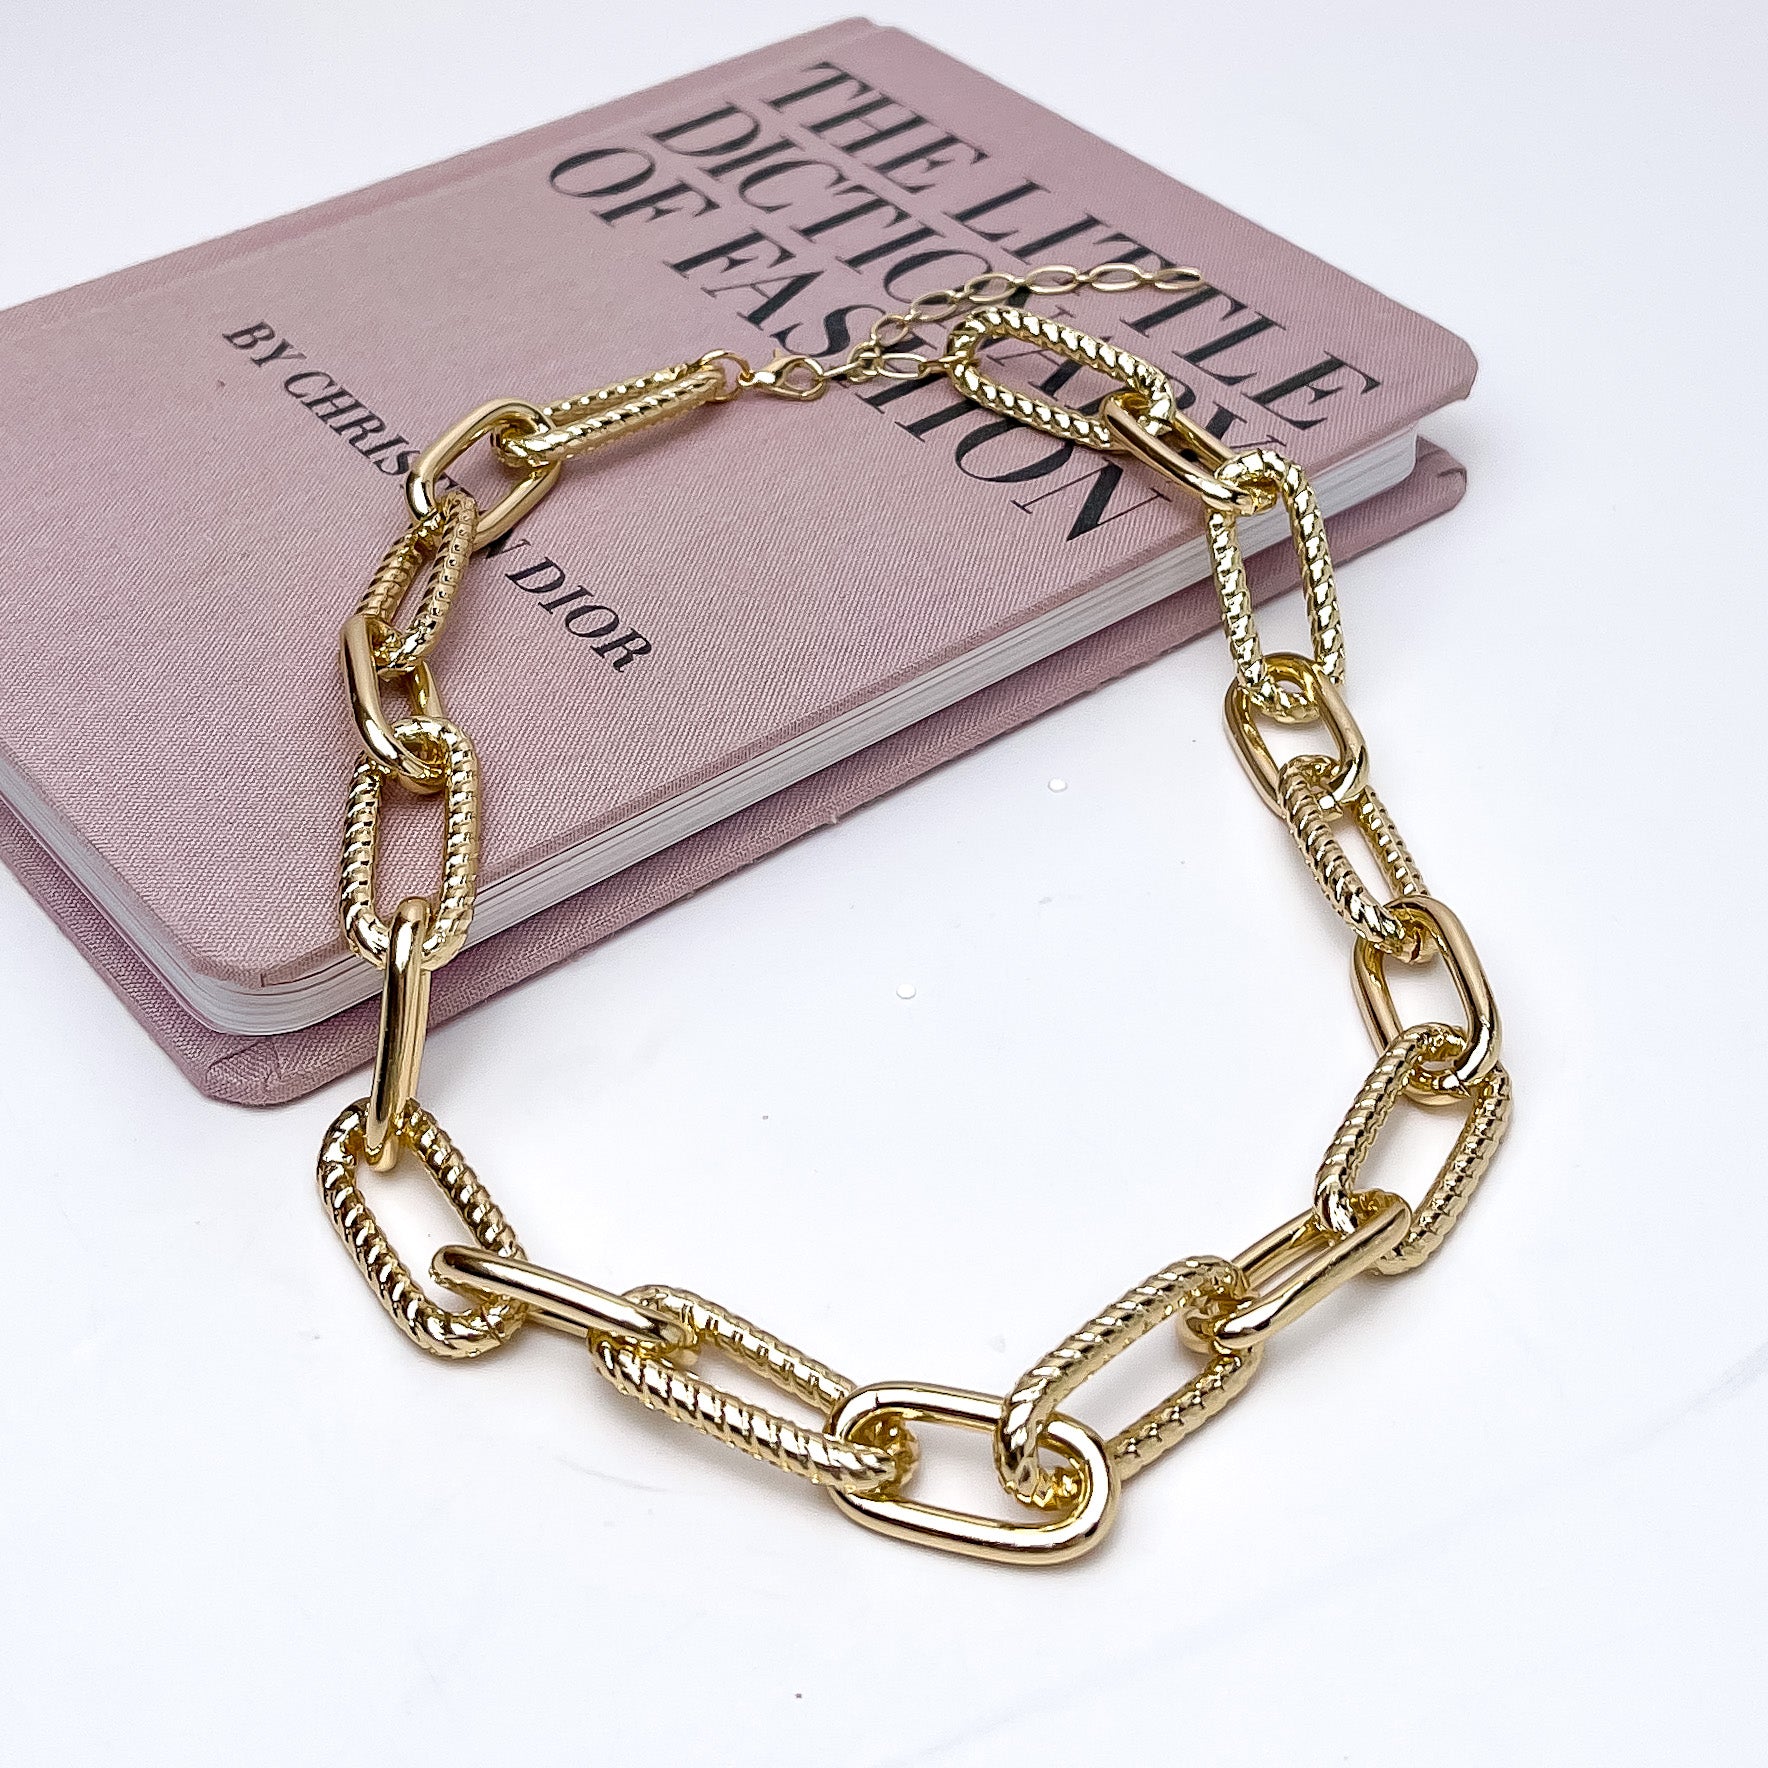 The Weekender Gold Tone Chain Necklace. This necklace is pictured on a white background with part of it on a pink book.